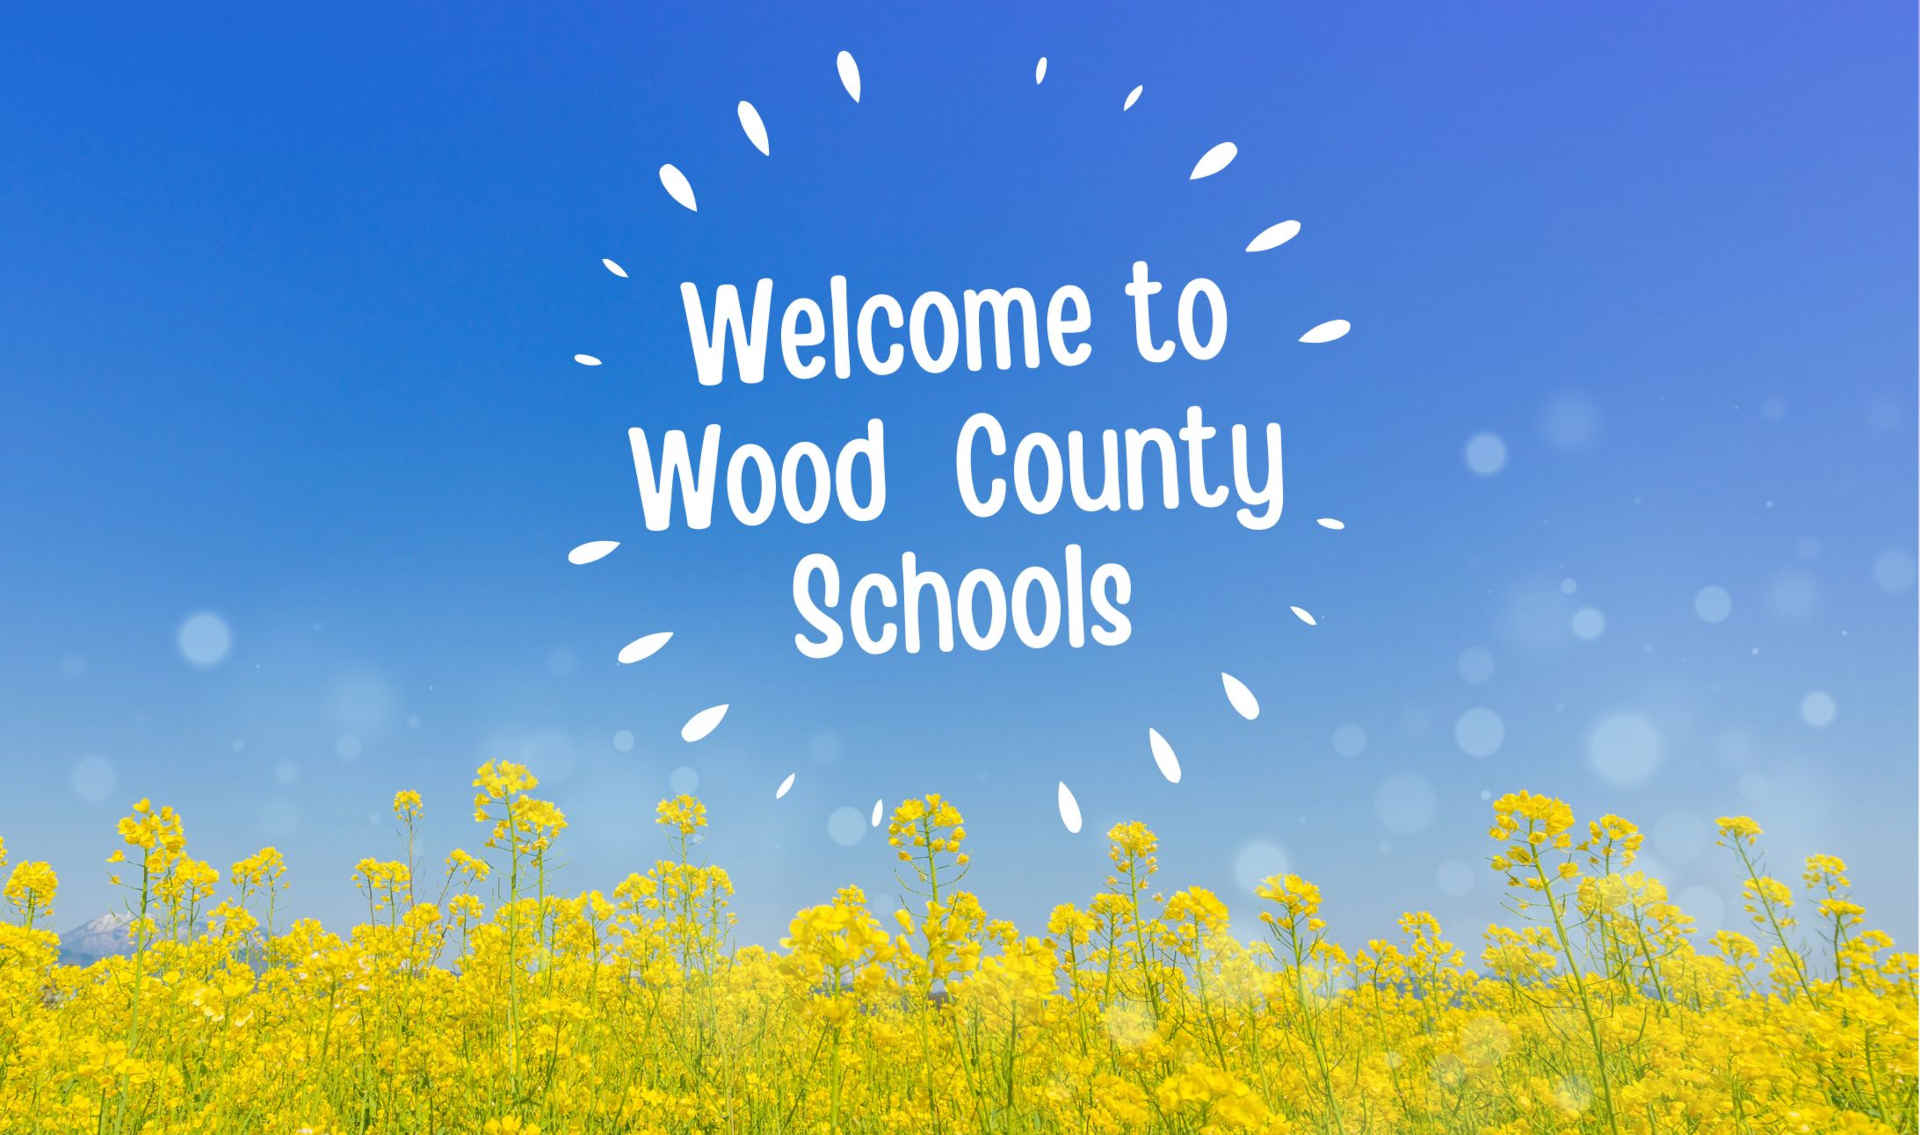 text reads "welcome to wood county schools" with a blue sky background and yellow flowers at the base